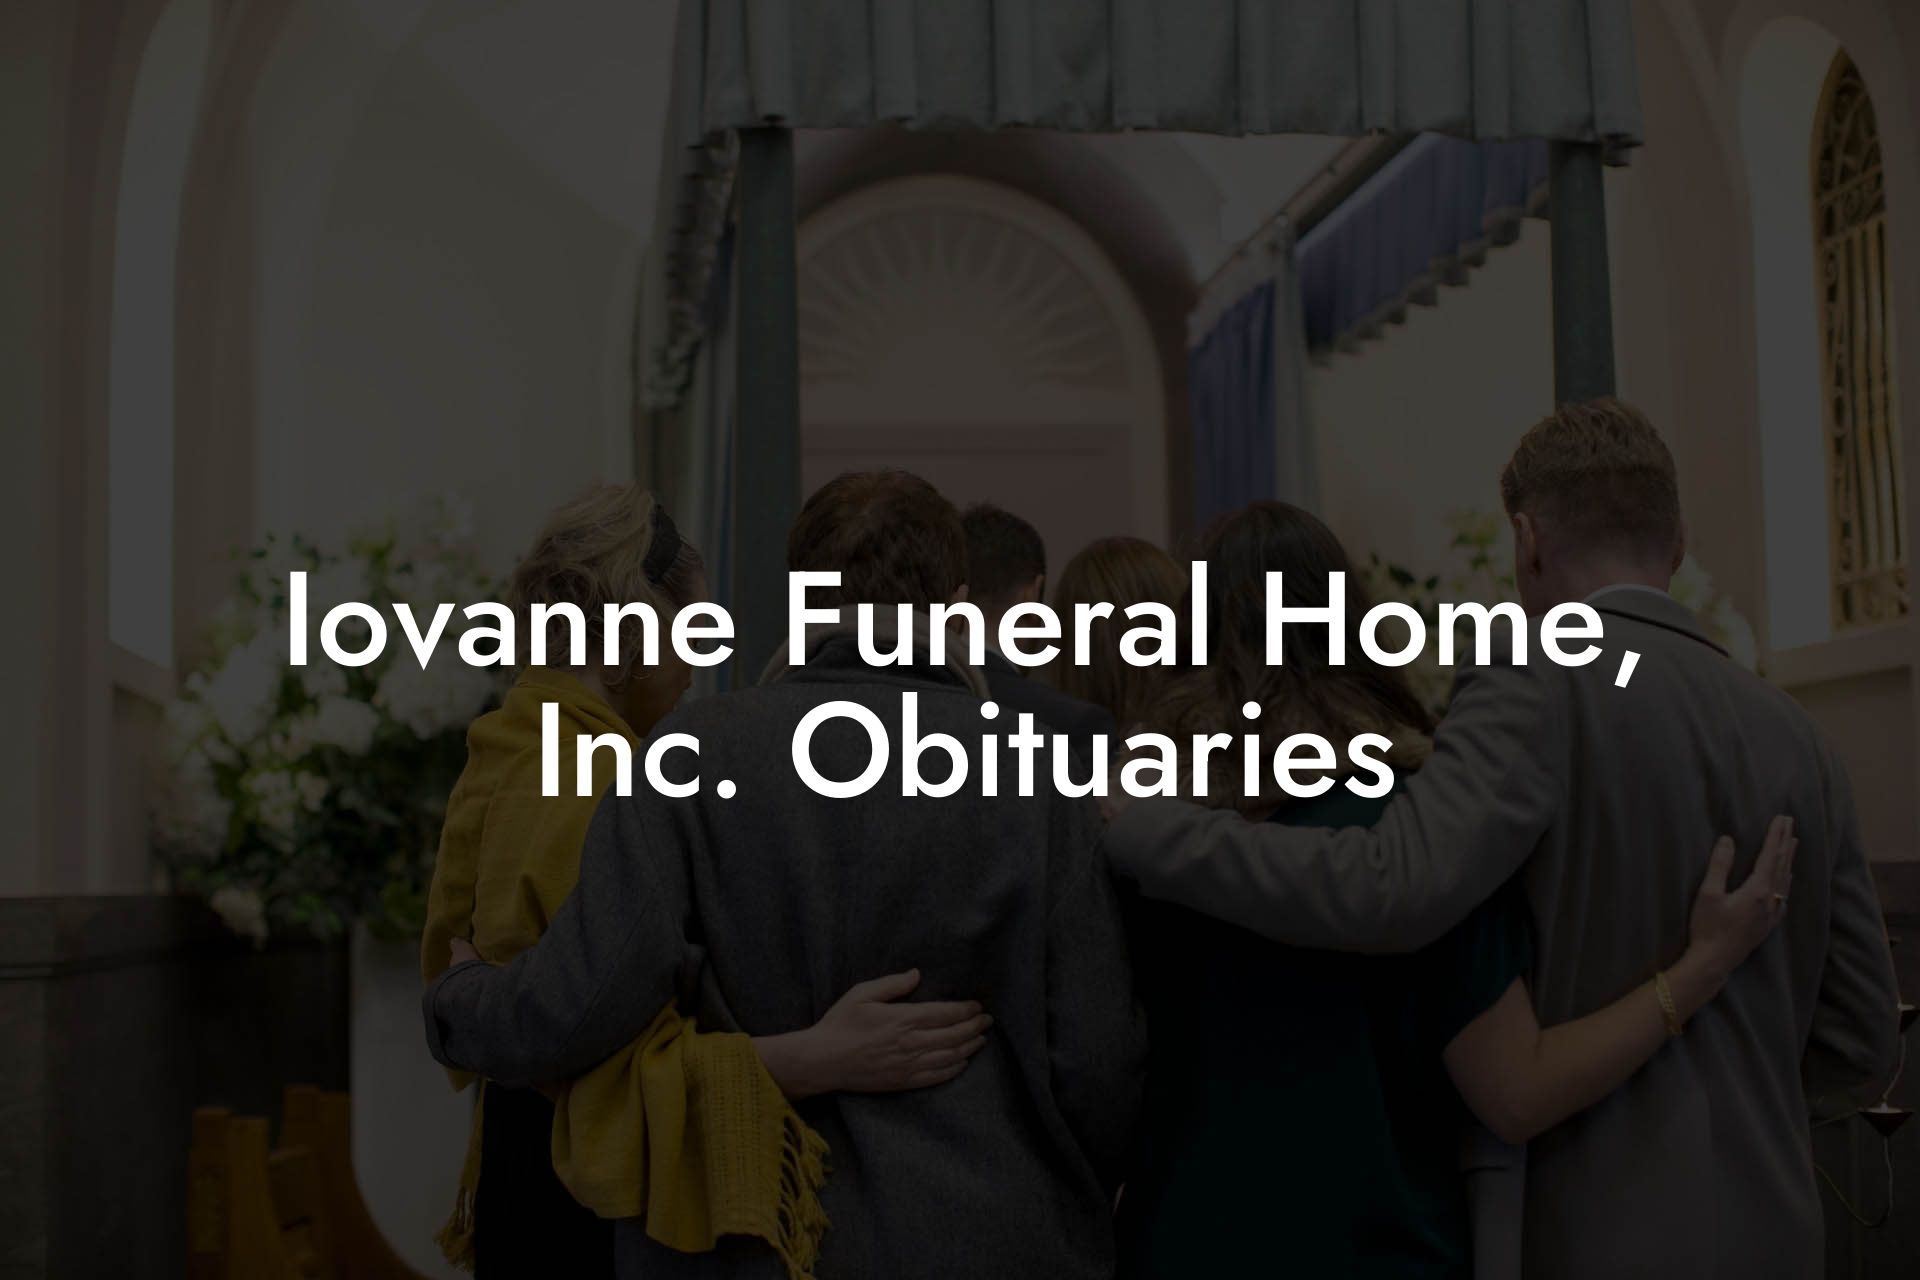 Iovanne Funeral Home, Inc. Obituaries